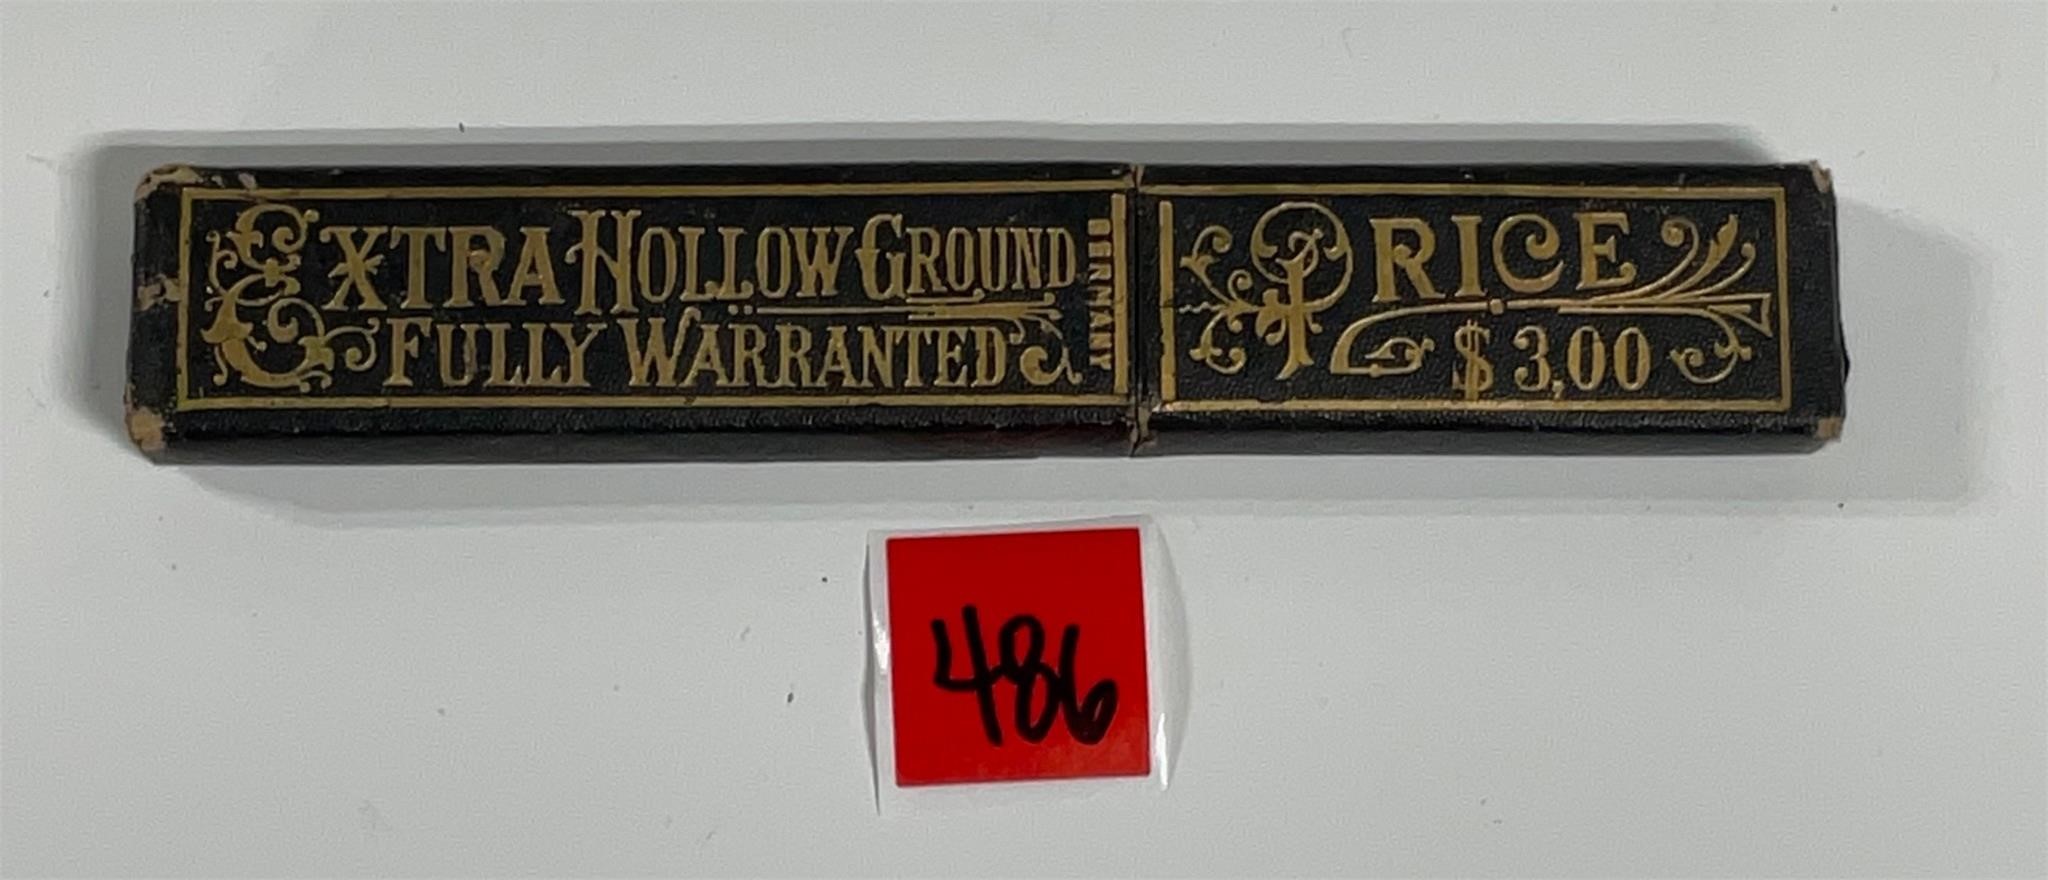 Vtg. Extra Hollow Ground - Fully Warranted